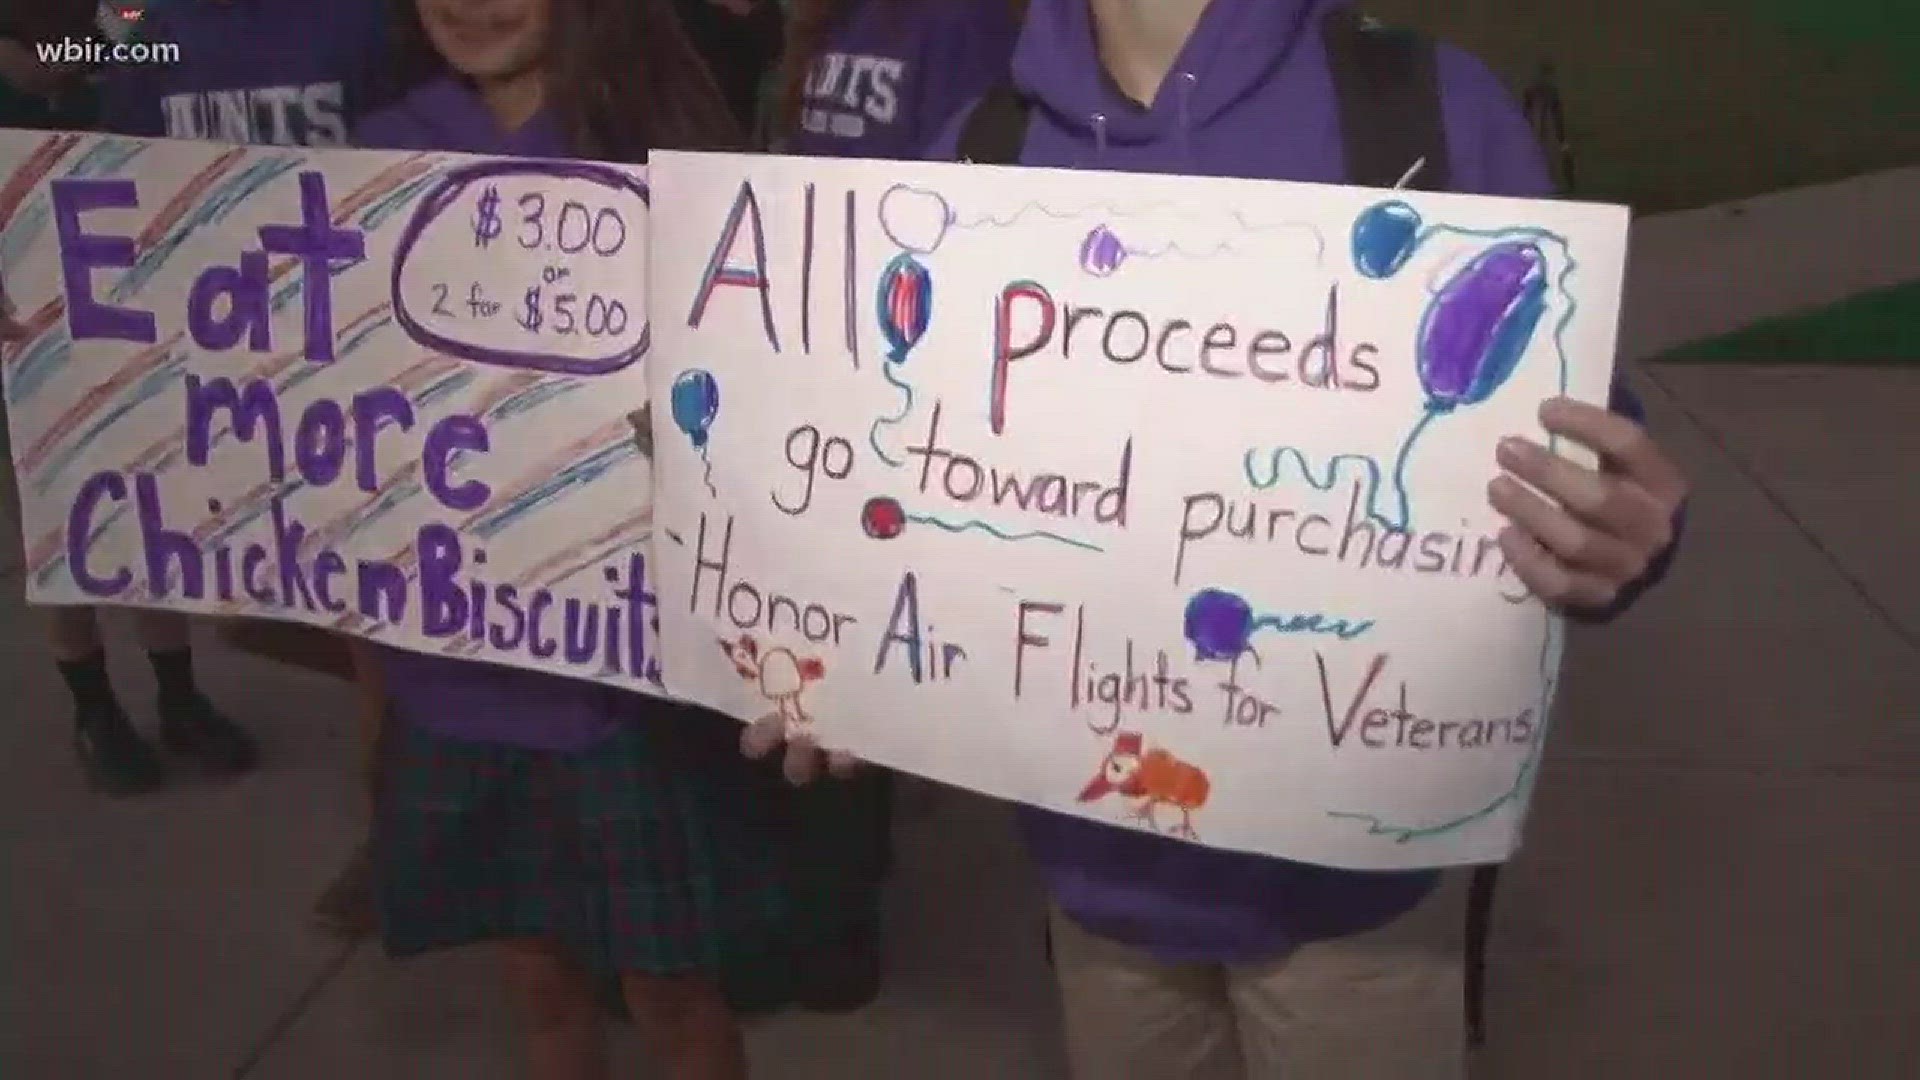 The Eighth Grade Interact Club sells chicken biscuits each Friday before school. They hope to send four veterans on the flight, which would cost around $2,000.